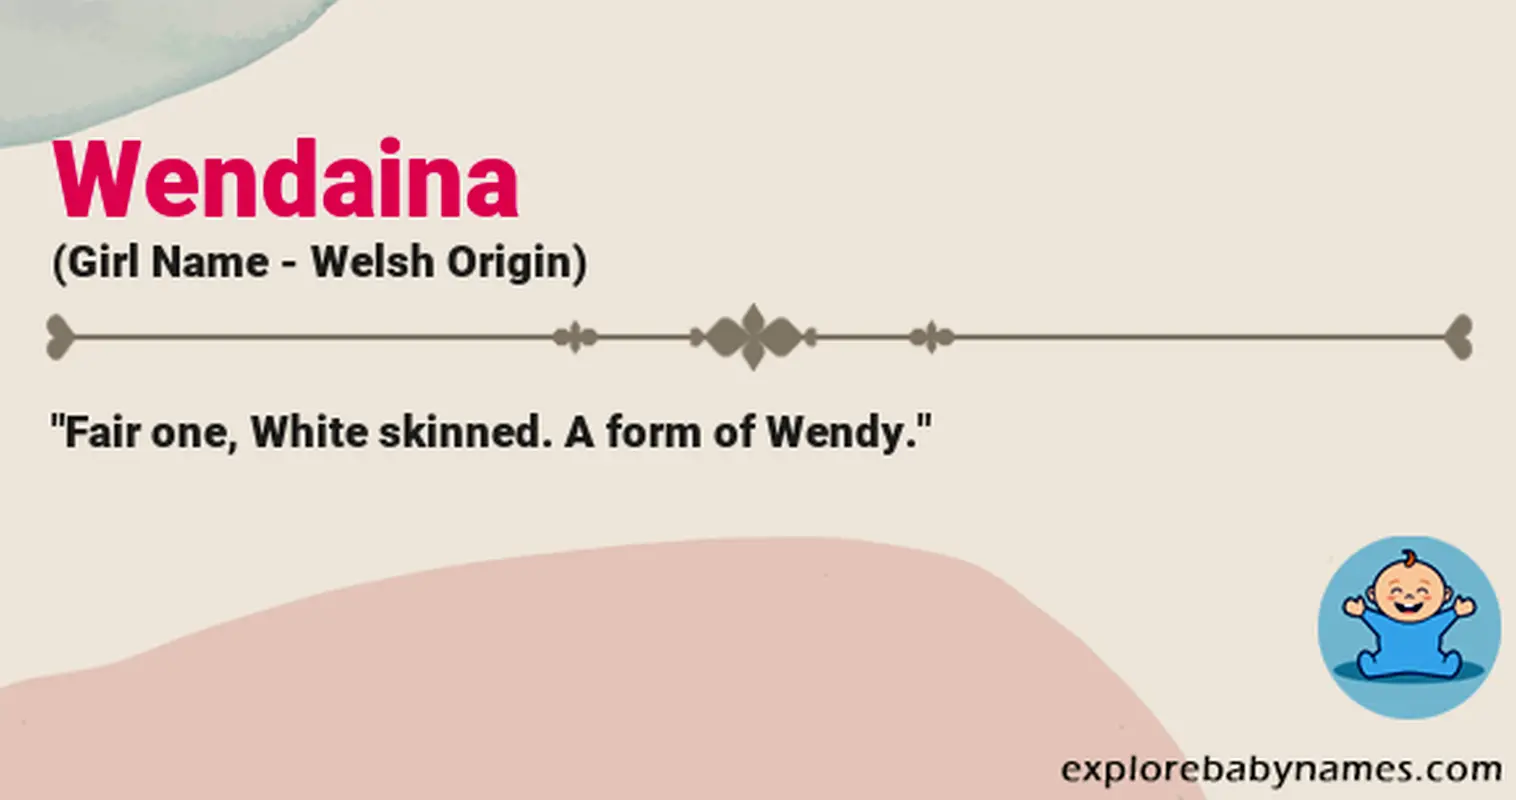 Meaning of Wendaina